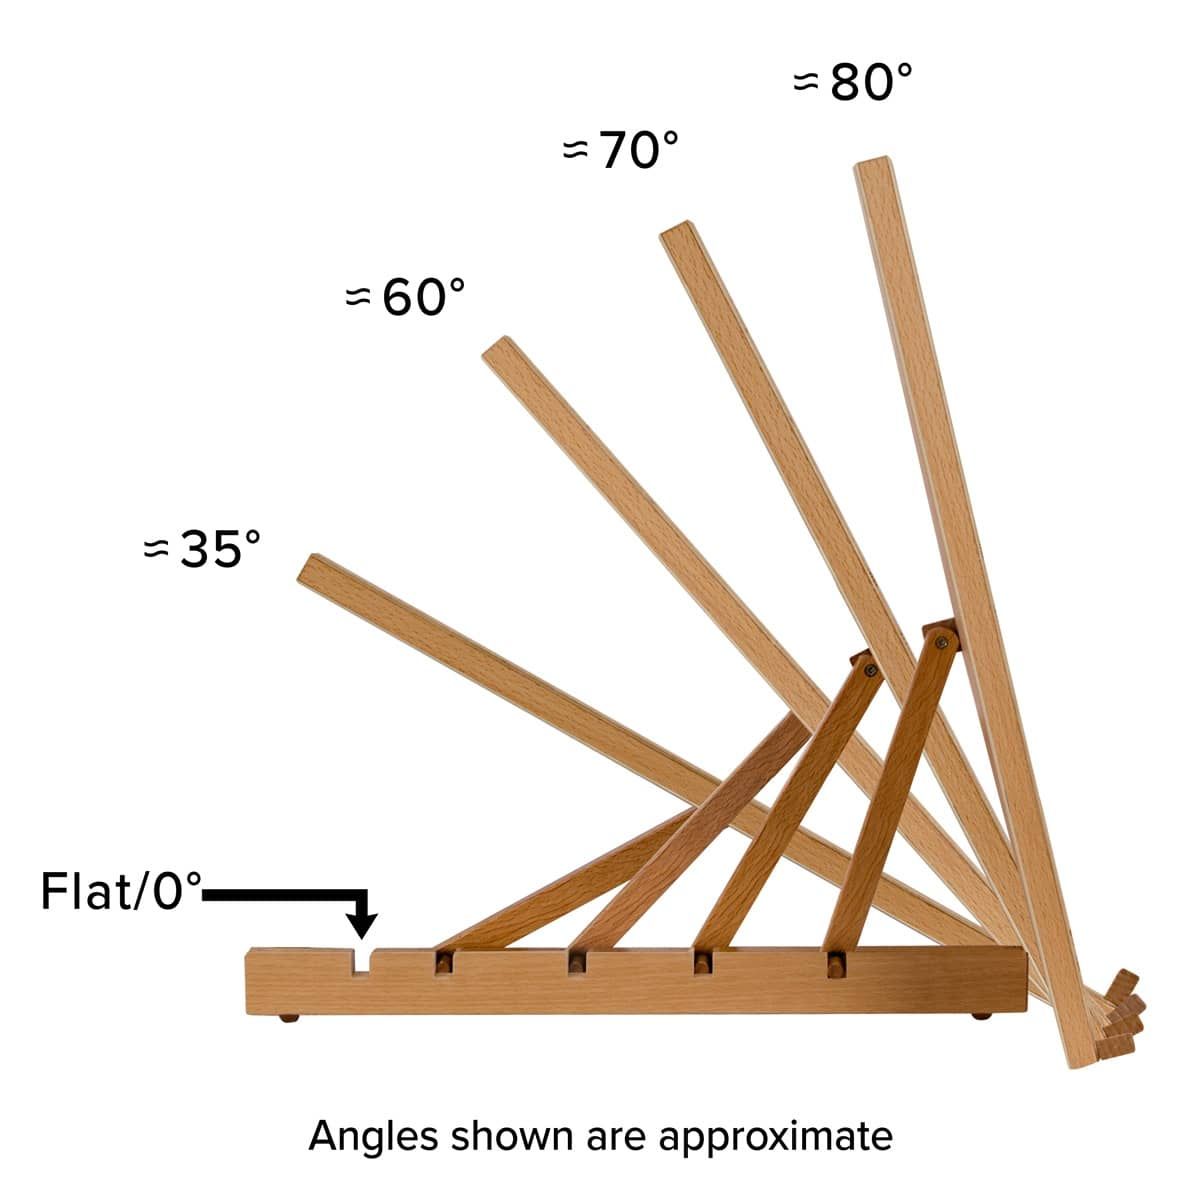 Angles shown are approximate